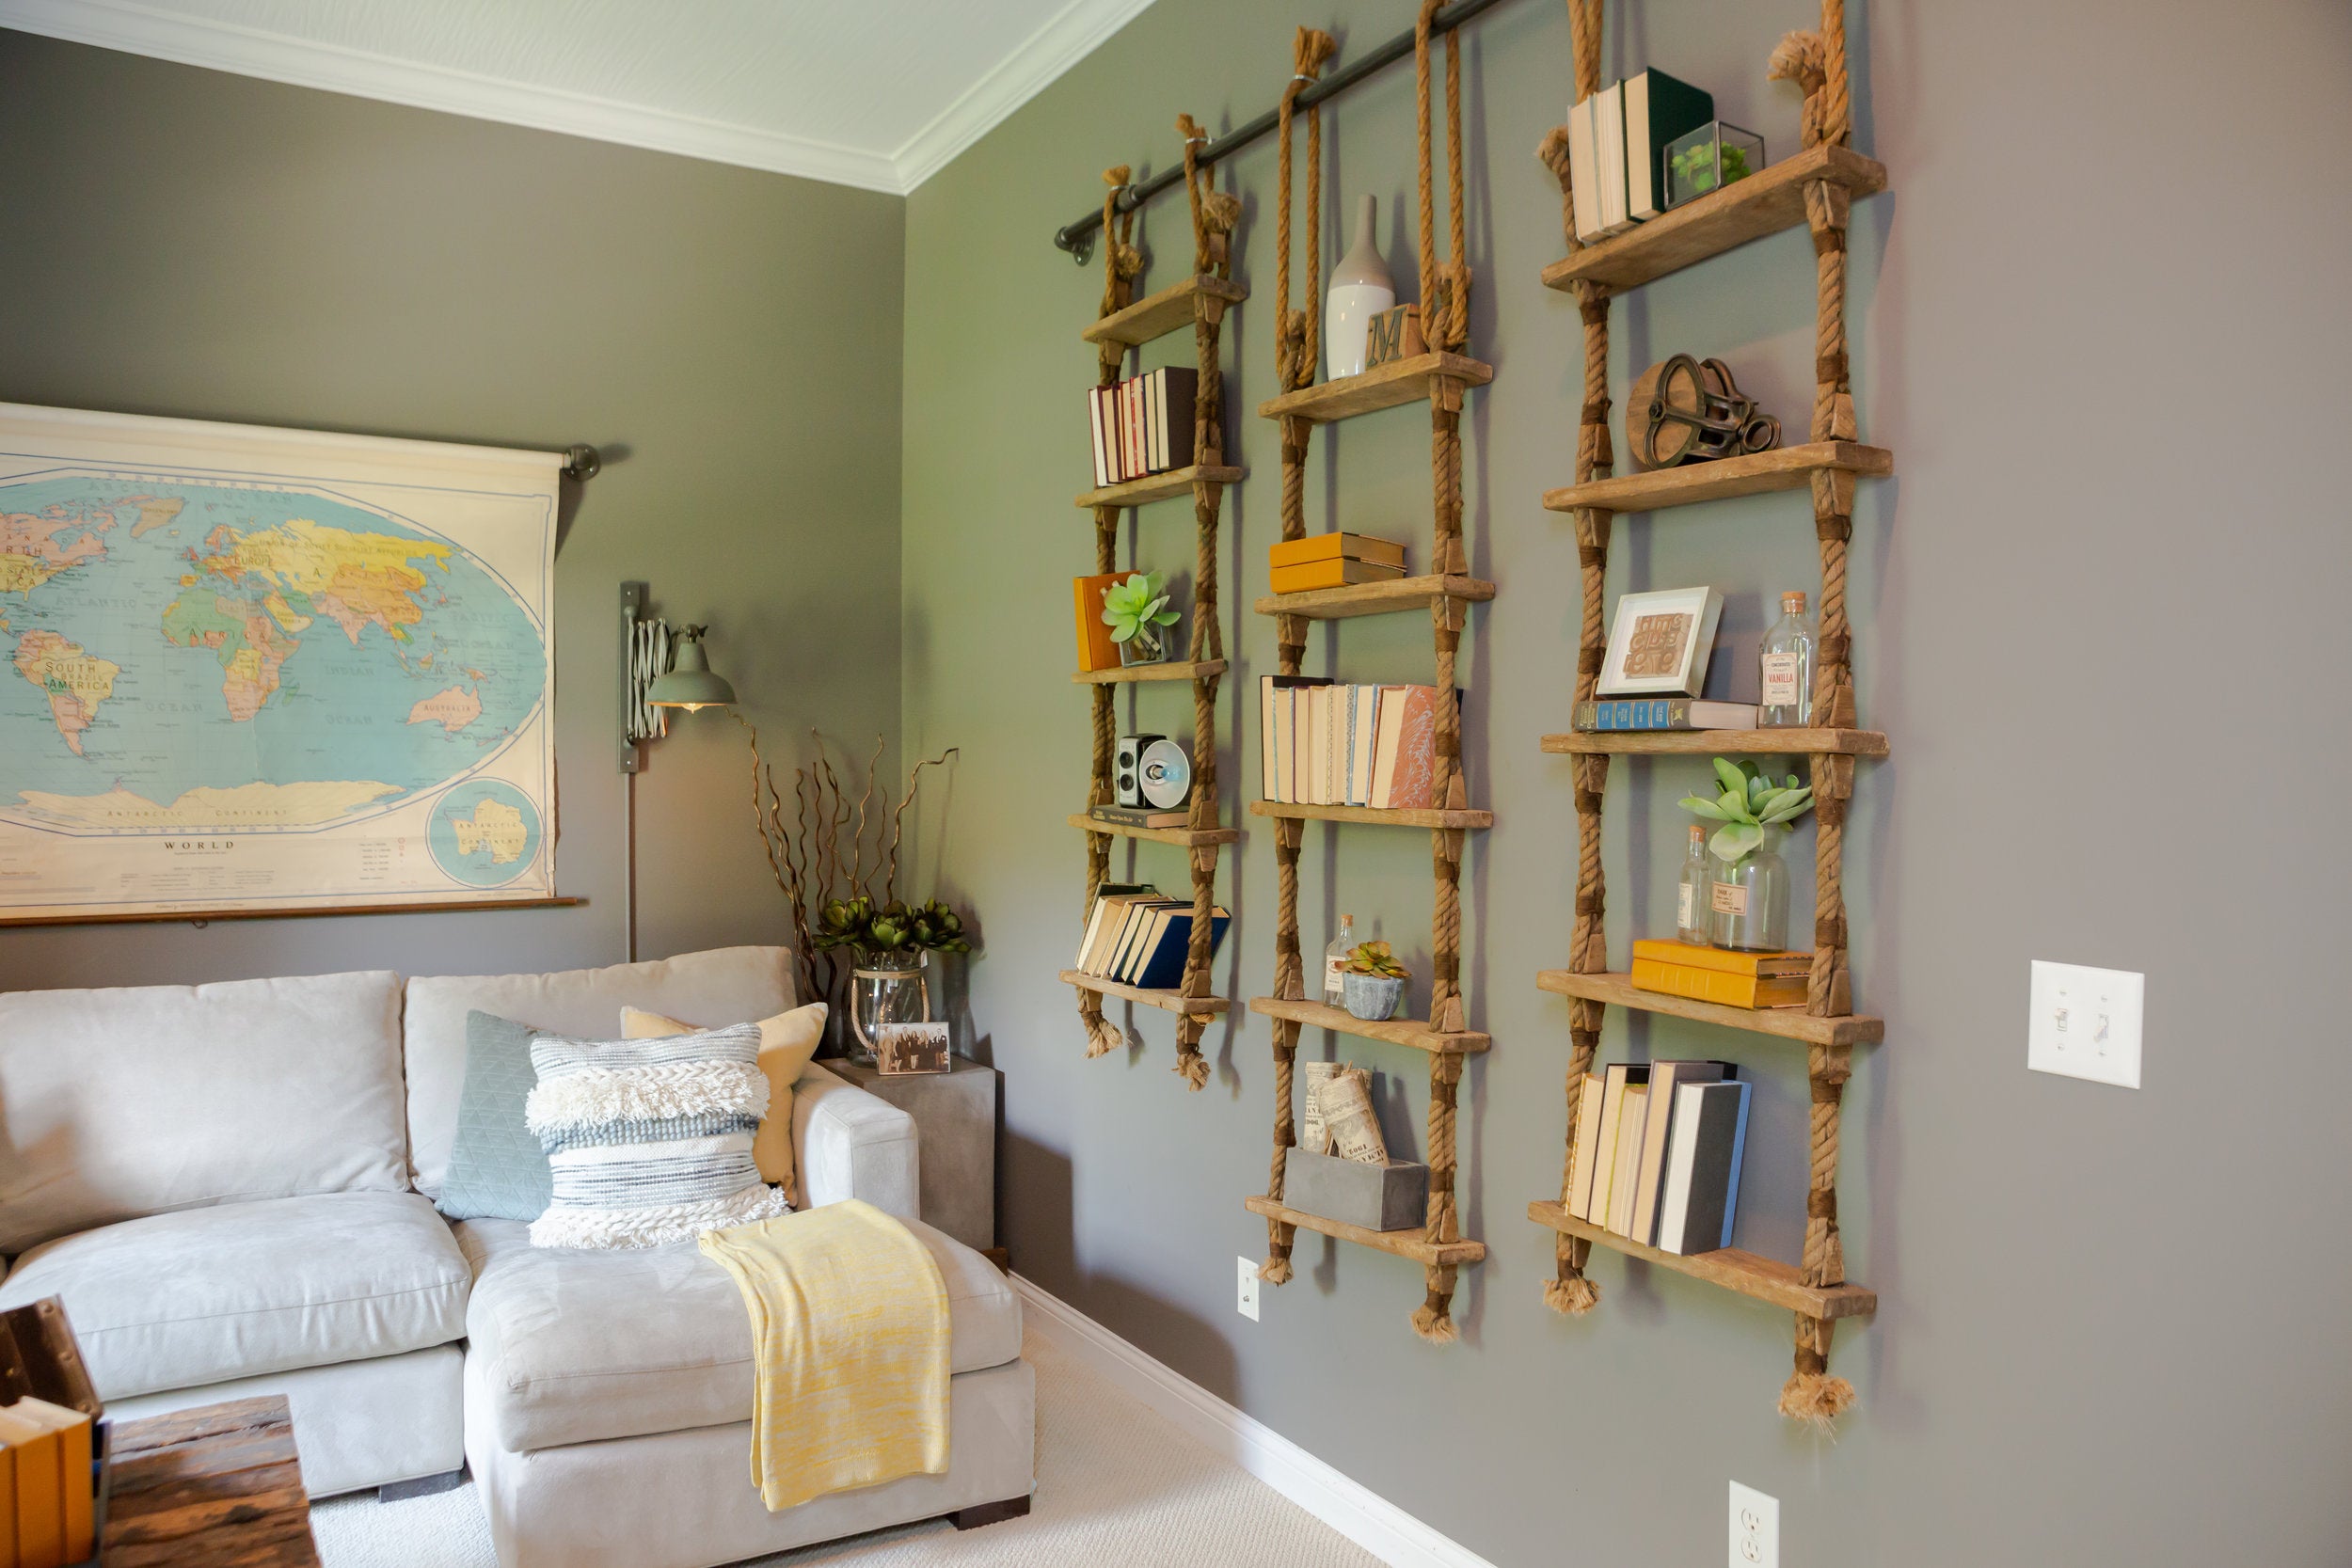 Creating A Unique Feature In Your Home By Using Repurposed Ship Ladders